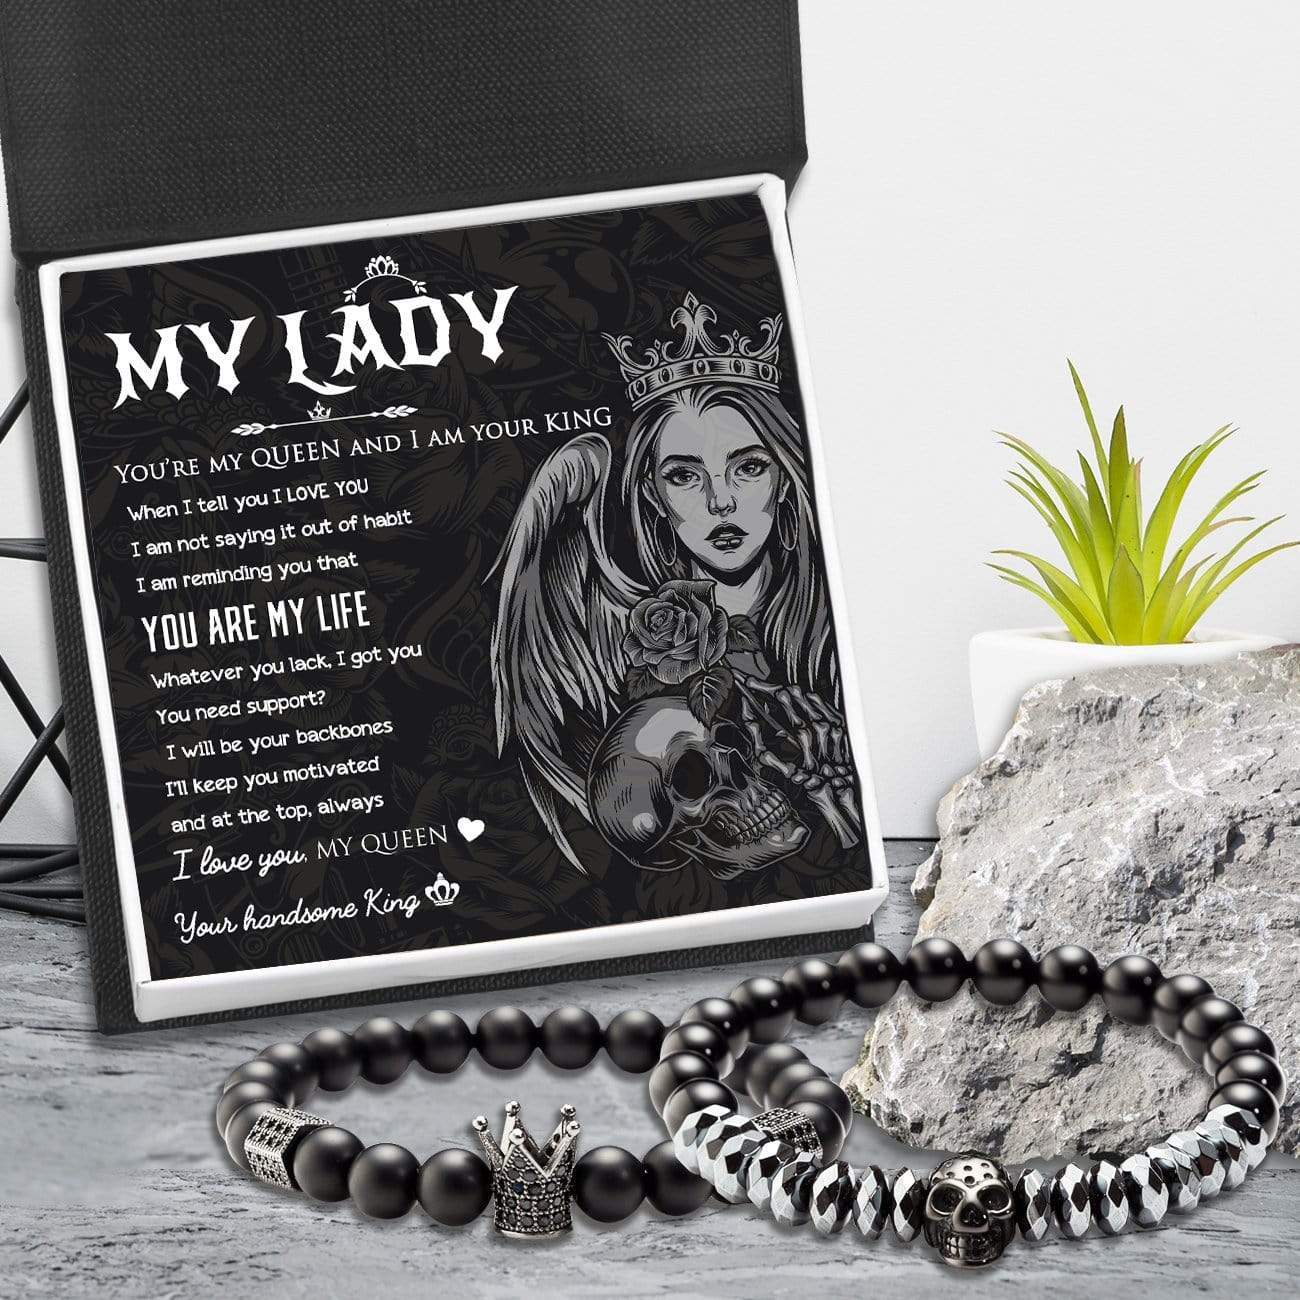 Couple Crown and Skull Bracelets - To My Lady - You Are My Life - Gbu13001